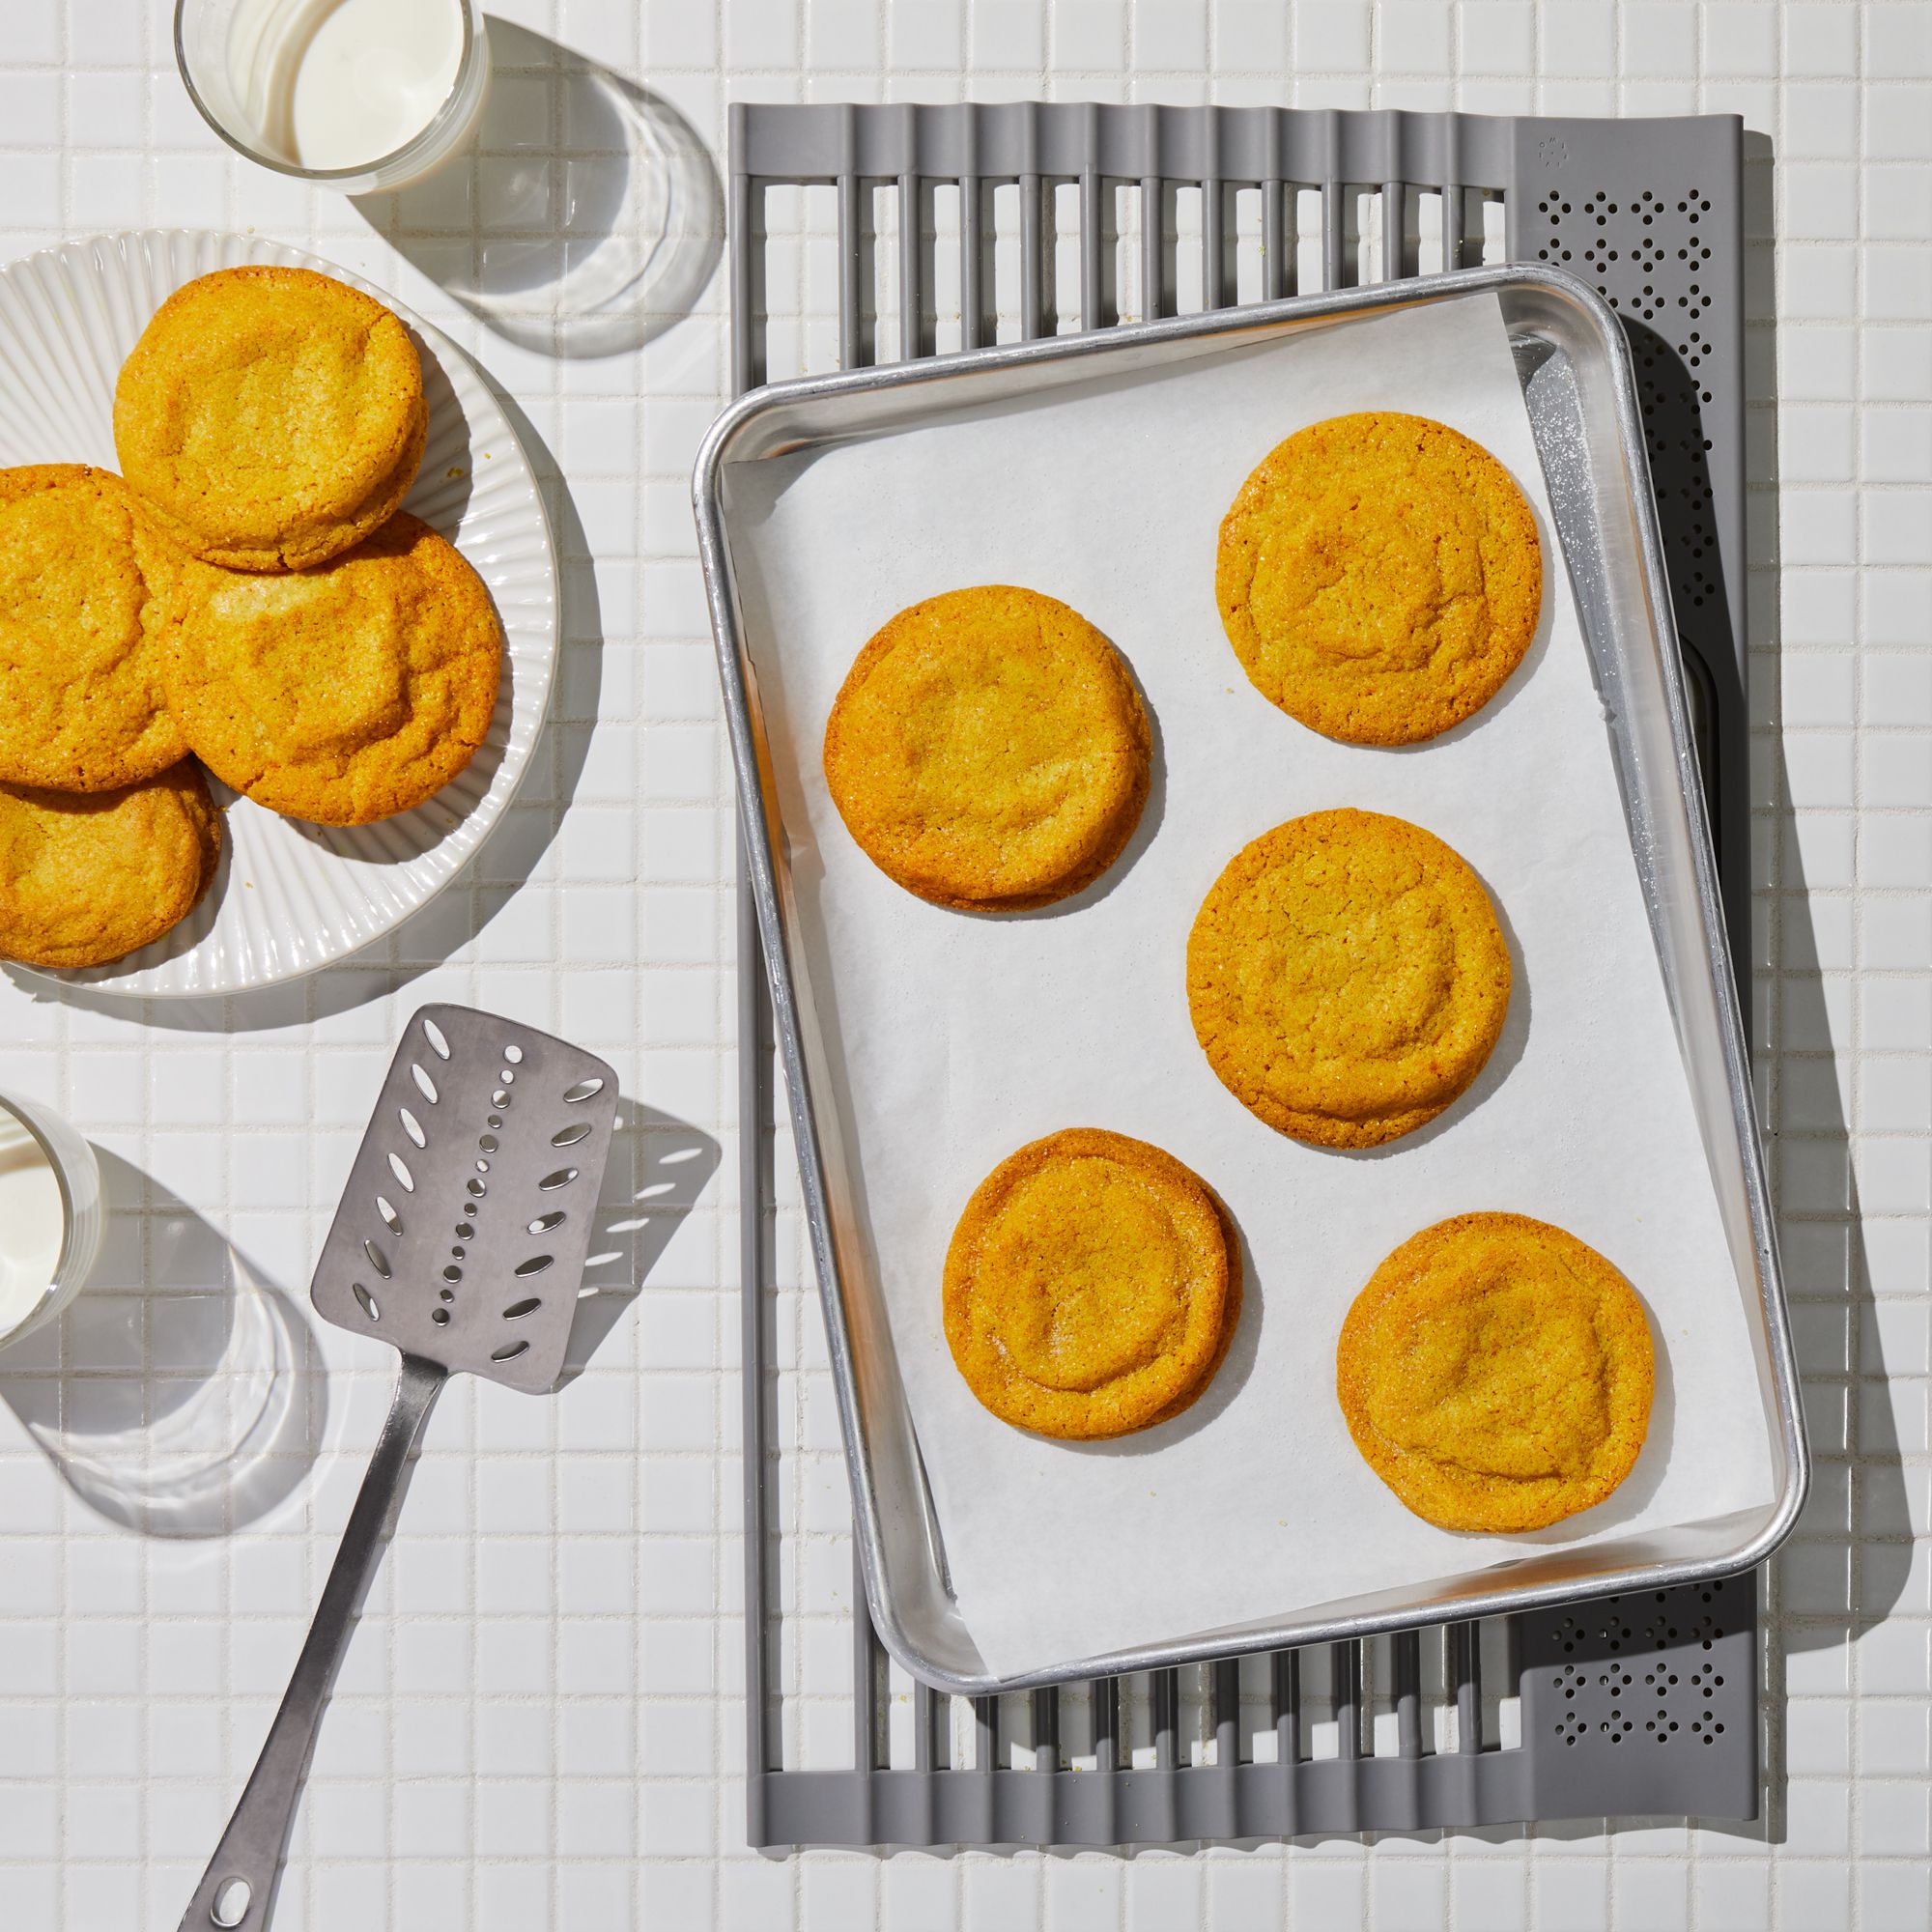 Food 52's Drying Rack Is the Only One I'll Ever Use